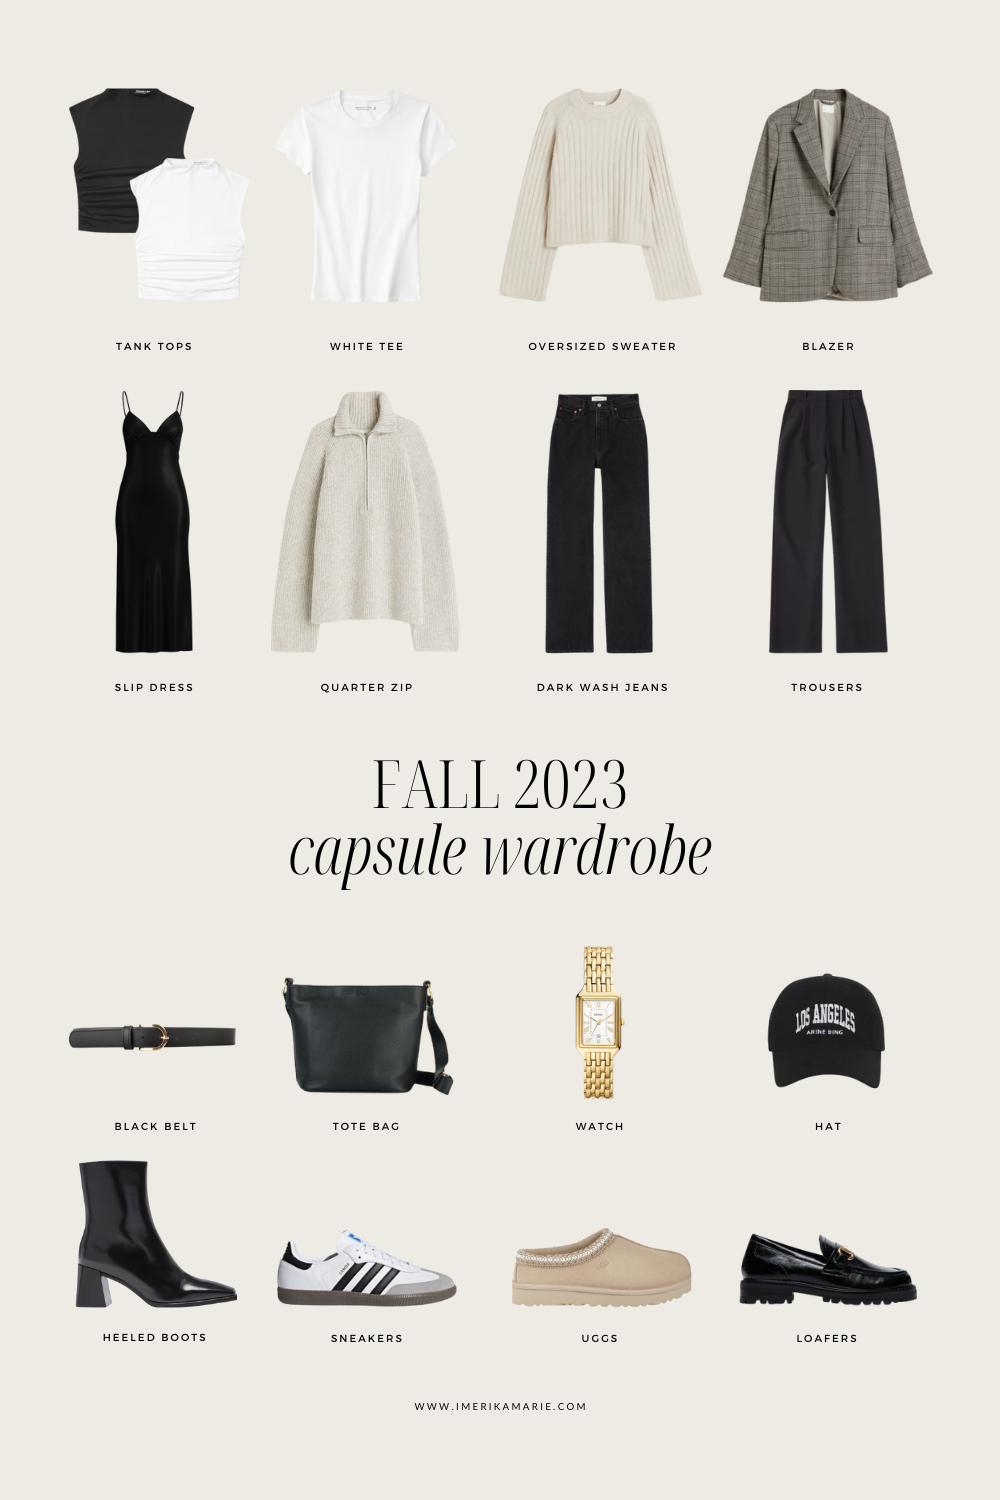 Fall 2023 Fashion Trends + How to Style Them